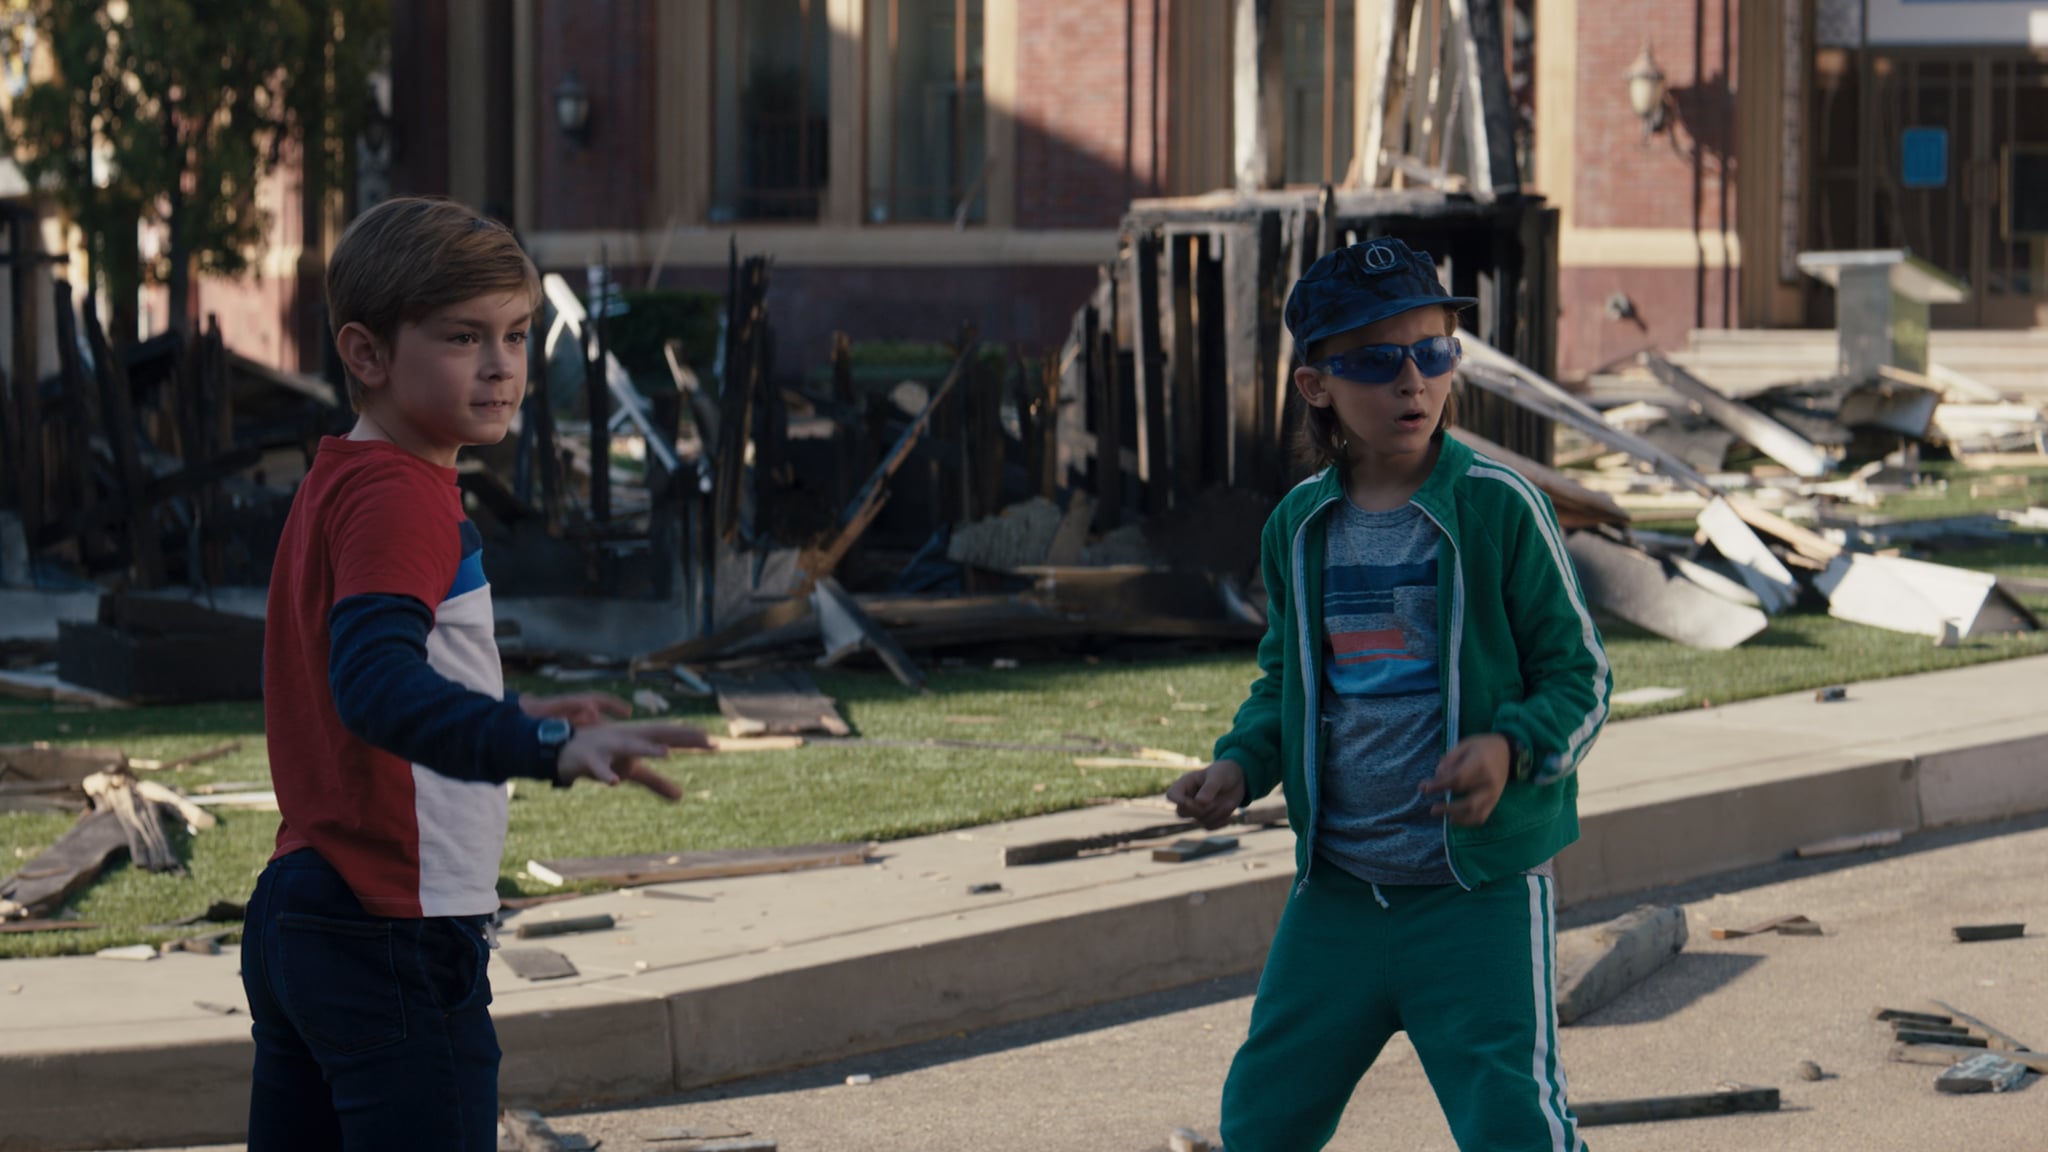 Julian Hilliard and Jett Klyne as Billy and Tommy Maximoff. The Doctor Strange in the Multiverse of Madness Cast Brings Together MCU Favorites and New Faces